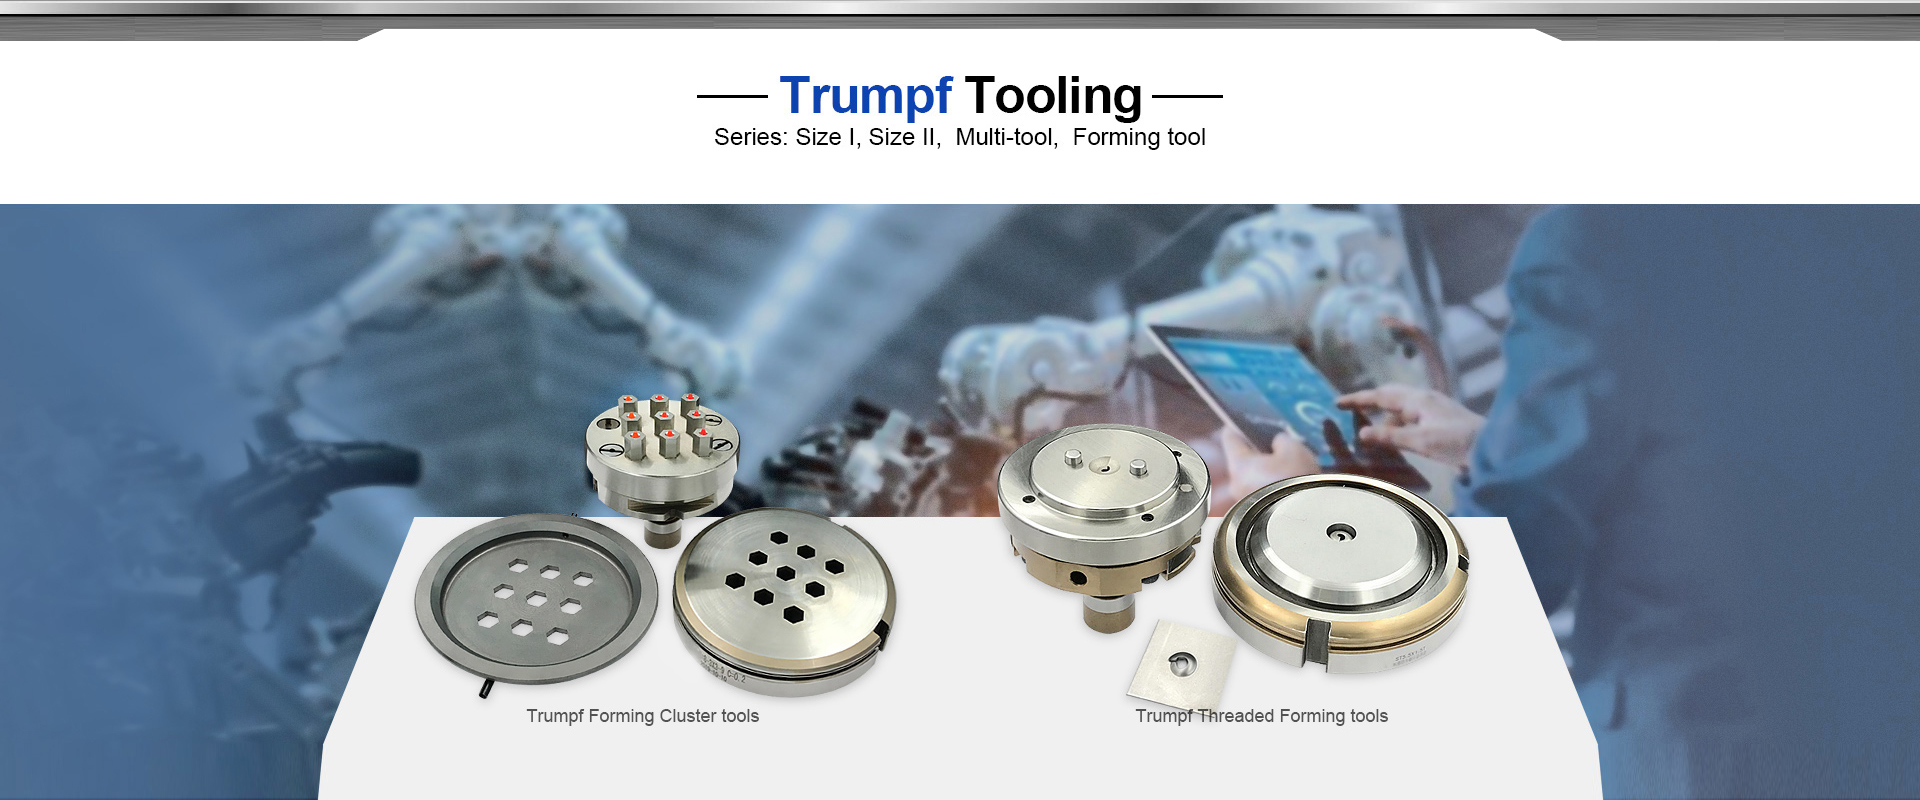 banner_turret_punch_tools_TRUMPF_systems